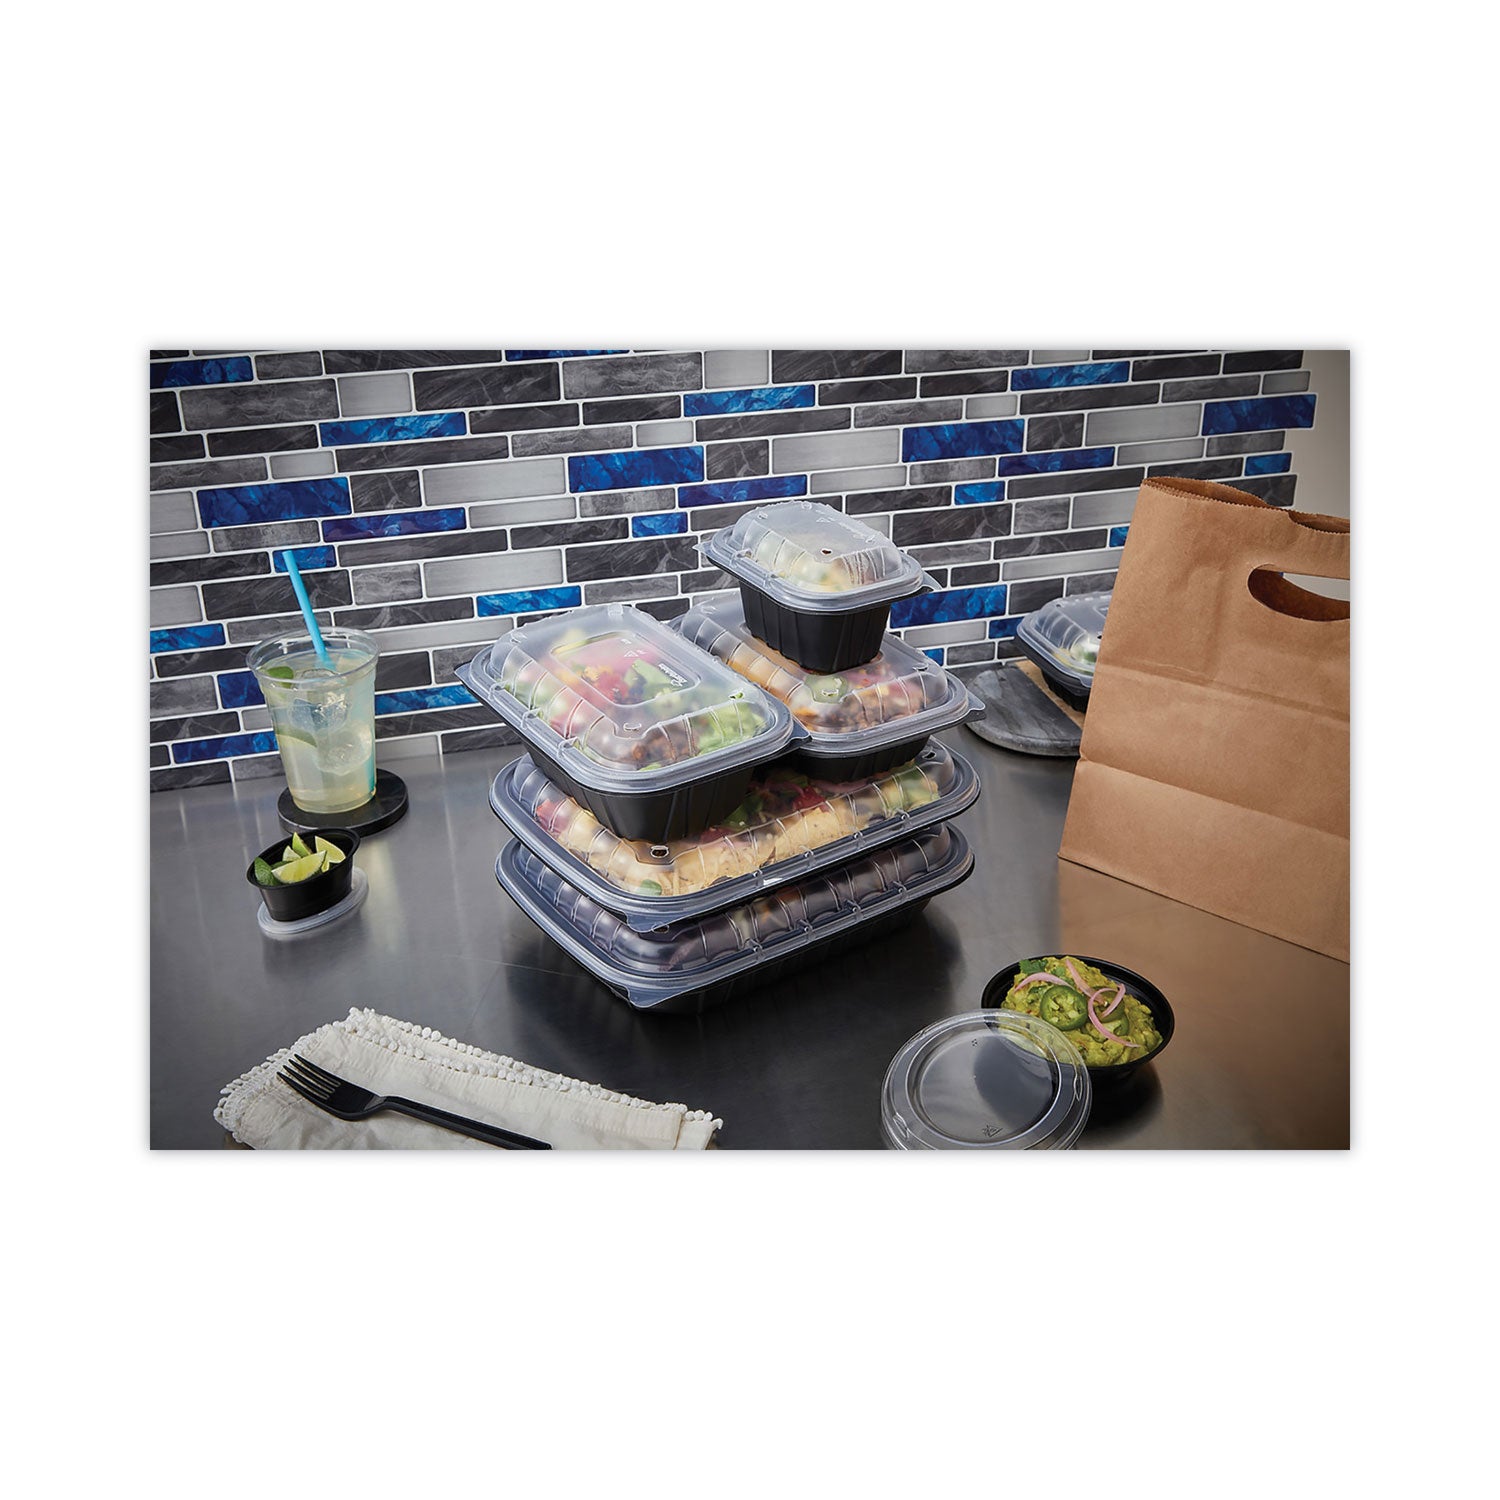 earthchoice-entree2go-takeout-container-32-oz-866-x-575-x-272-black-plastic-300-carton_pctycnb9x632000 - 5